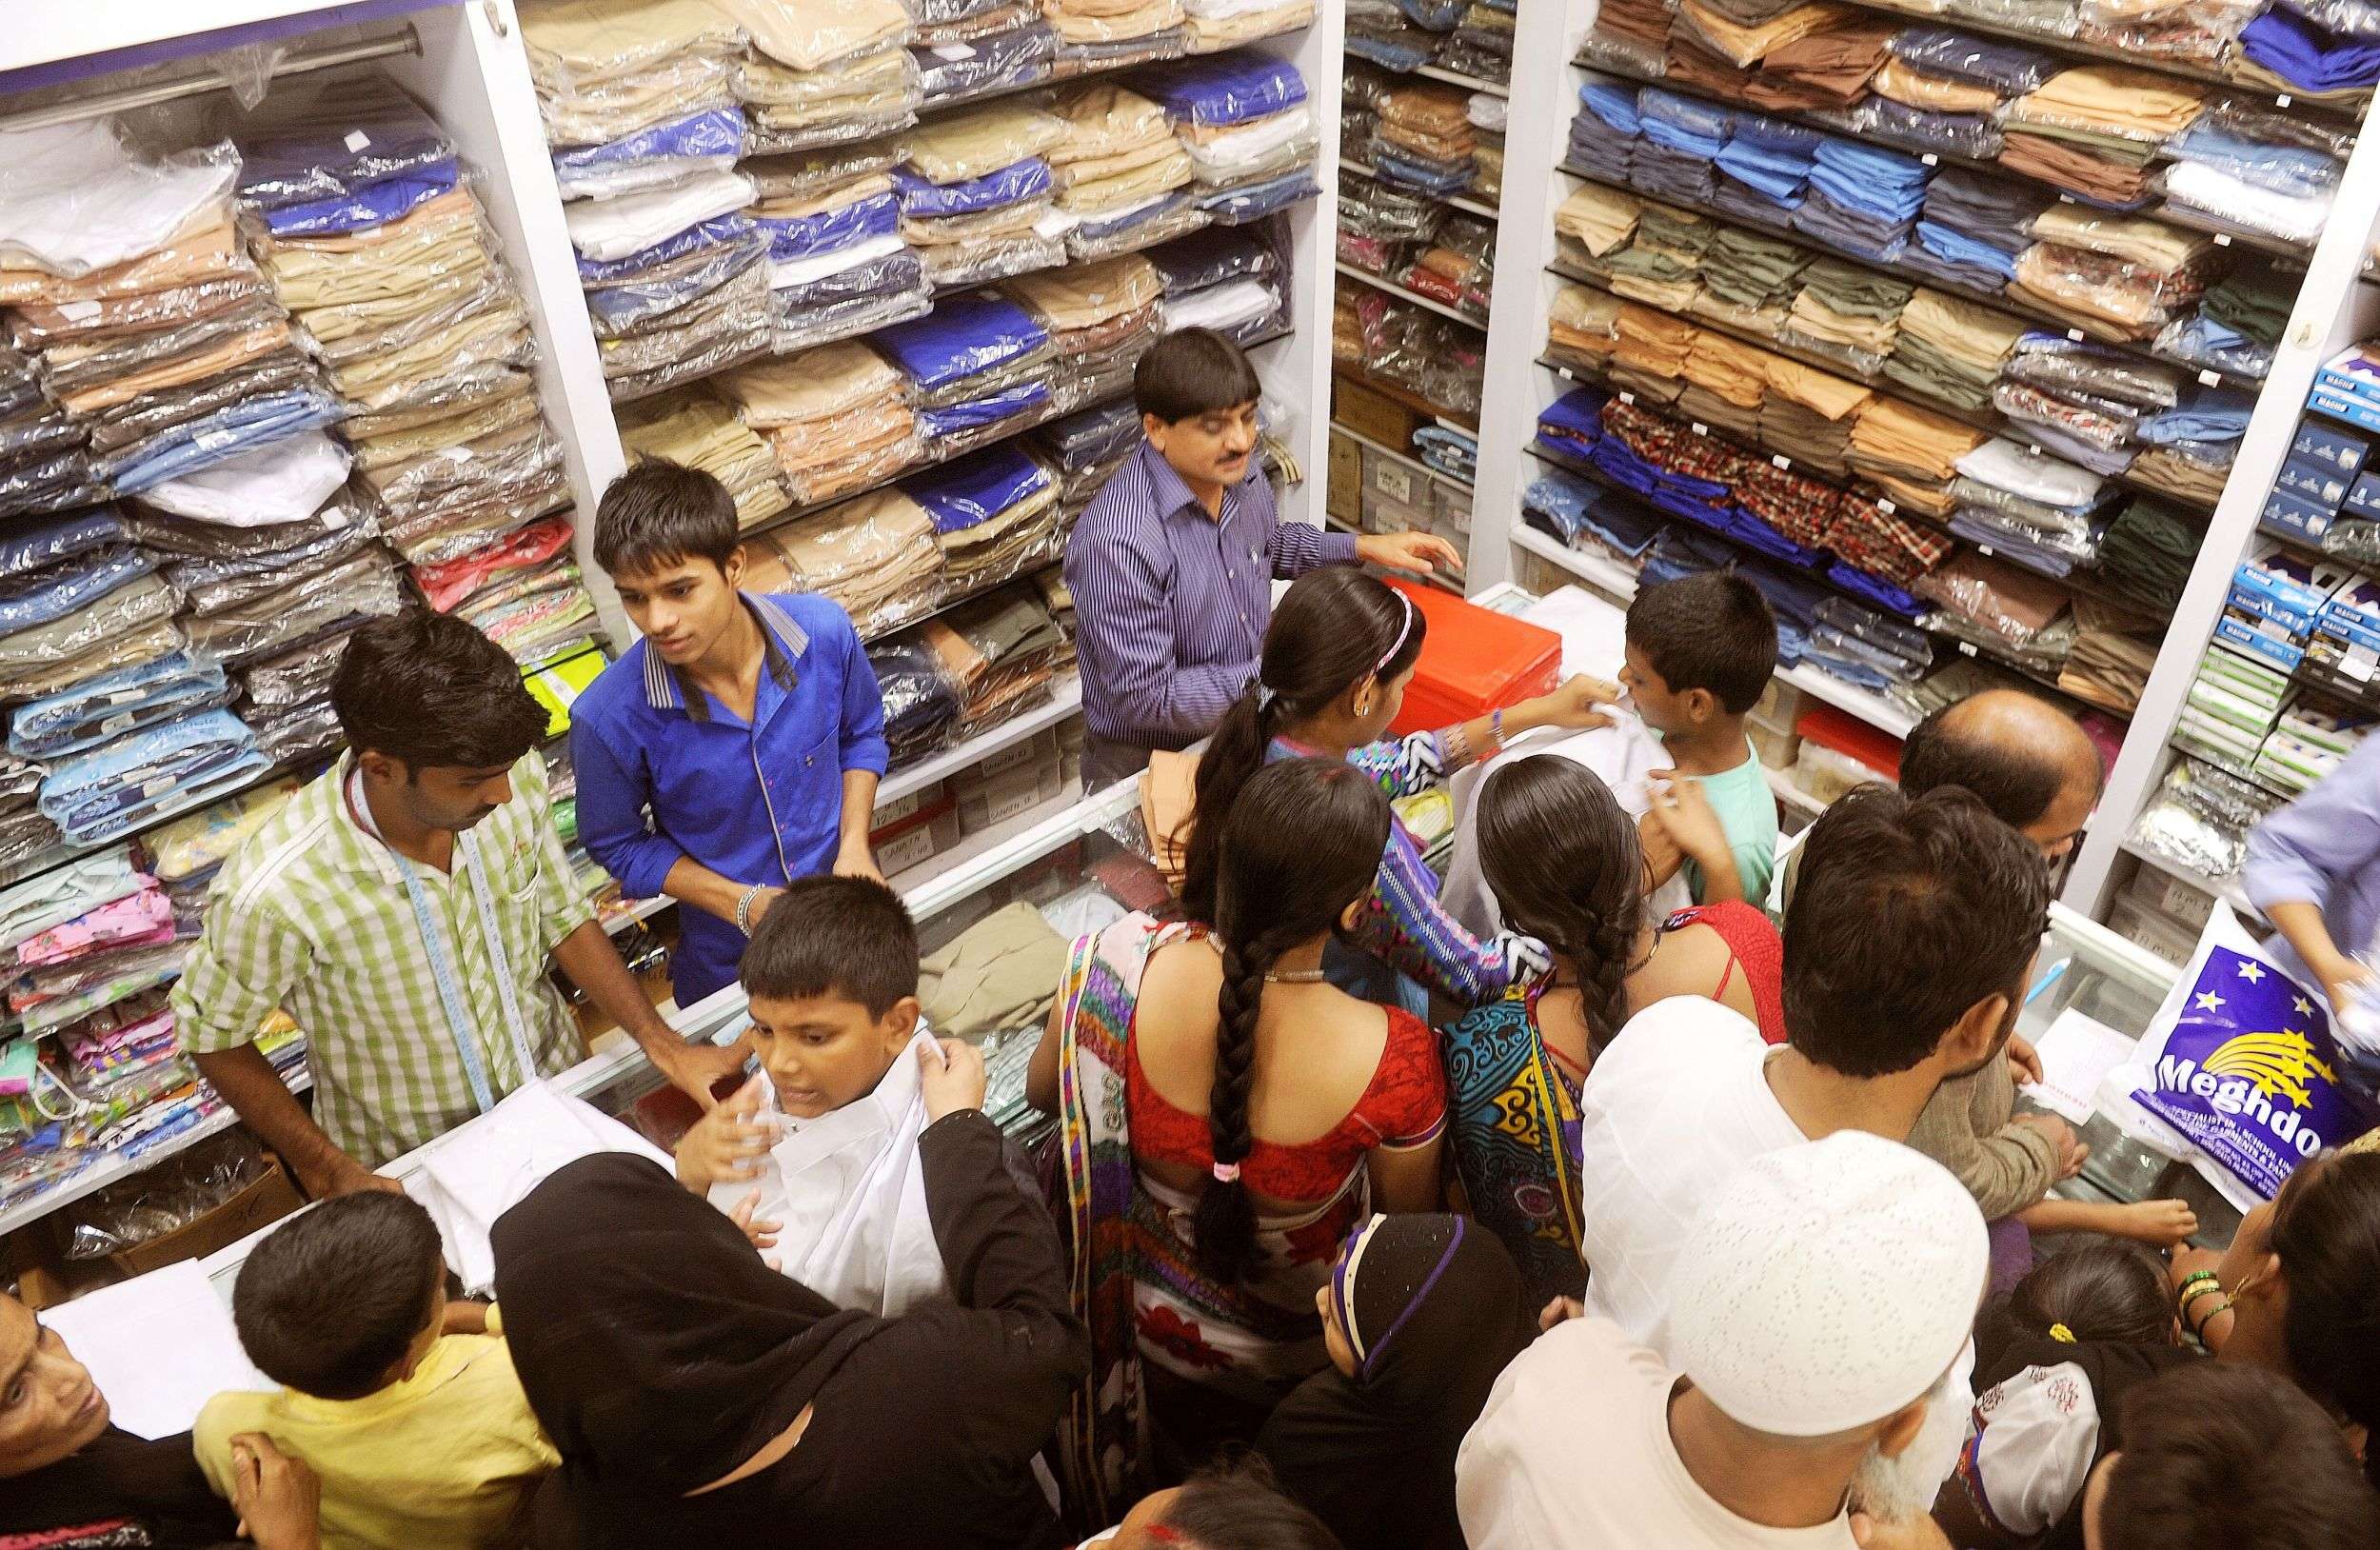 Shoppers at a store selling school uniforms and raincoats for children in Mumbai. (TOI file photo by Sanjay Hadkar)